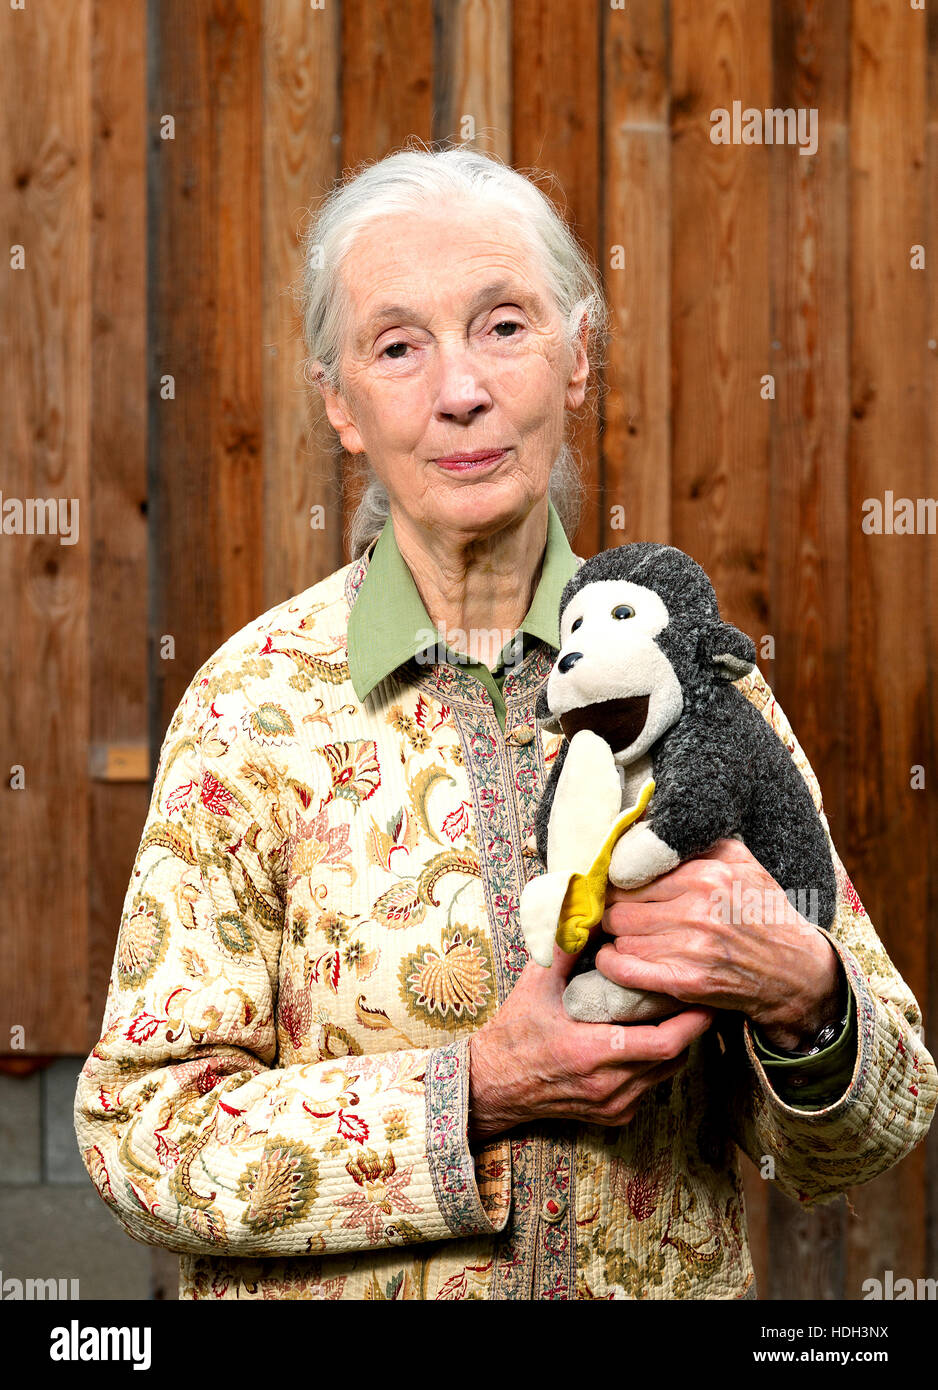 Jane Goodall, Anthropologist stands with her stuffed monkey Mr H. Stock Photo